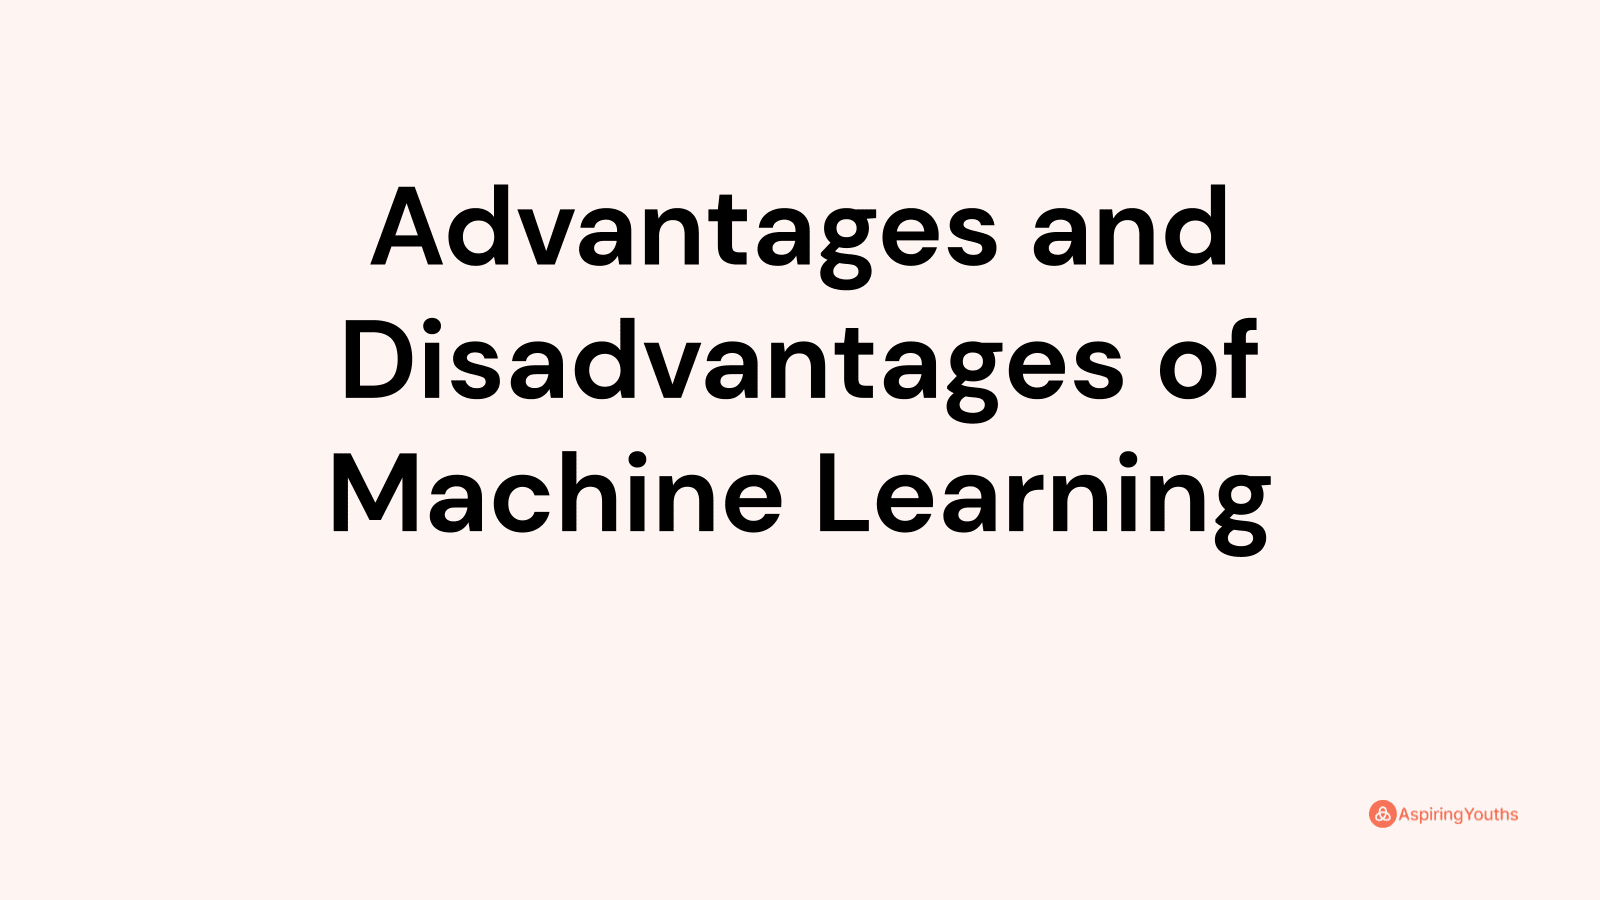 Advantages and disadvantages of Machine Learning